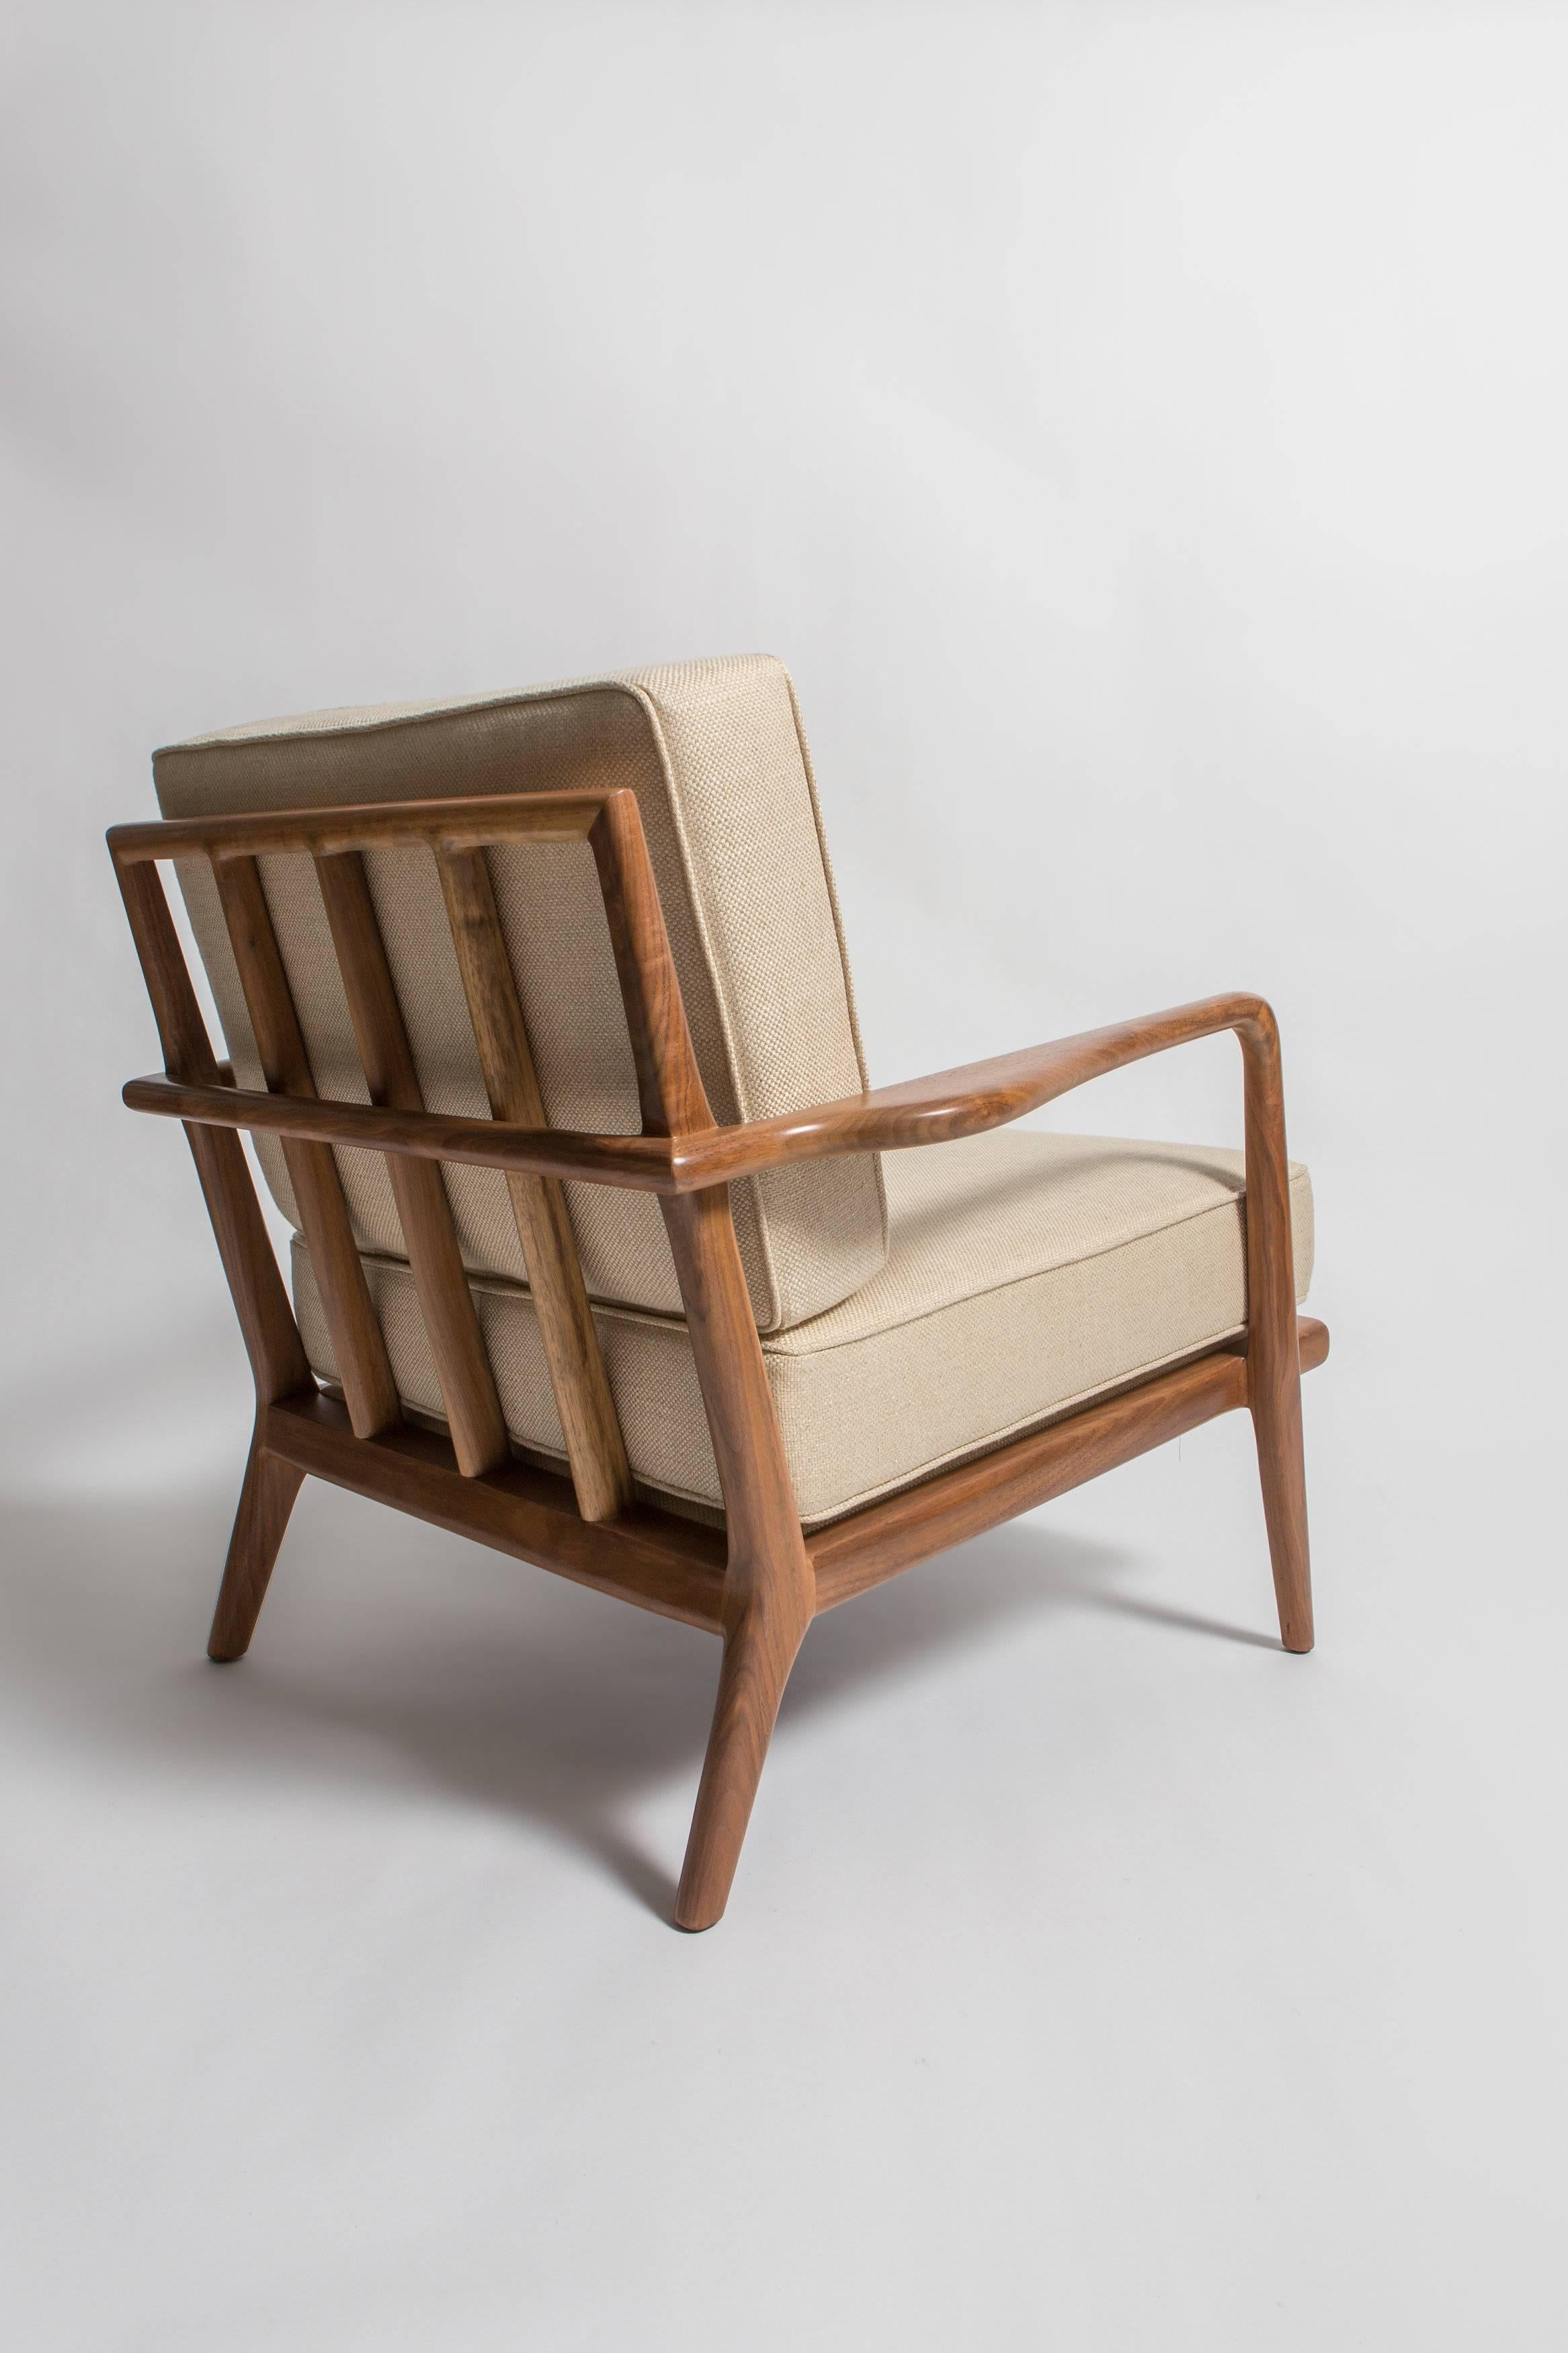 Hand-Crafted Vintage, 1950s, Solid Walnut Mel Smilow Railback Lounge Chair in Cream Linen For Sale